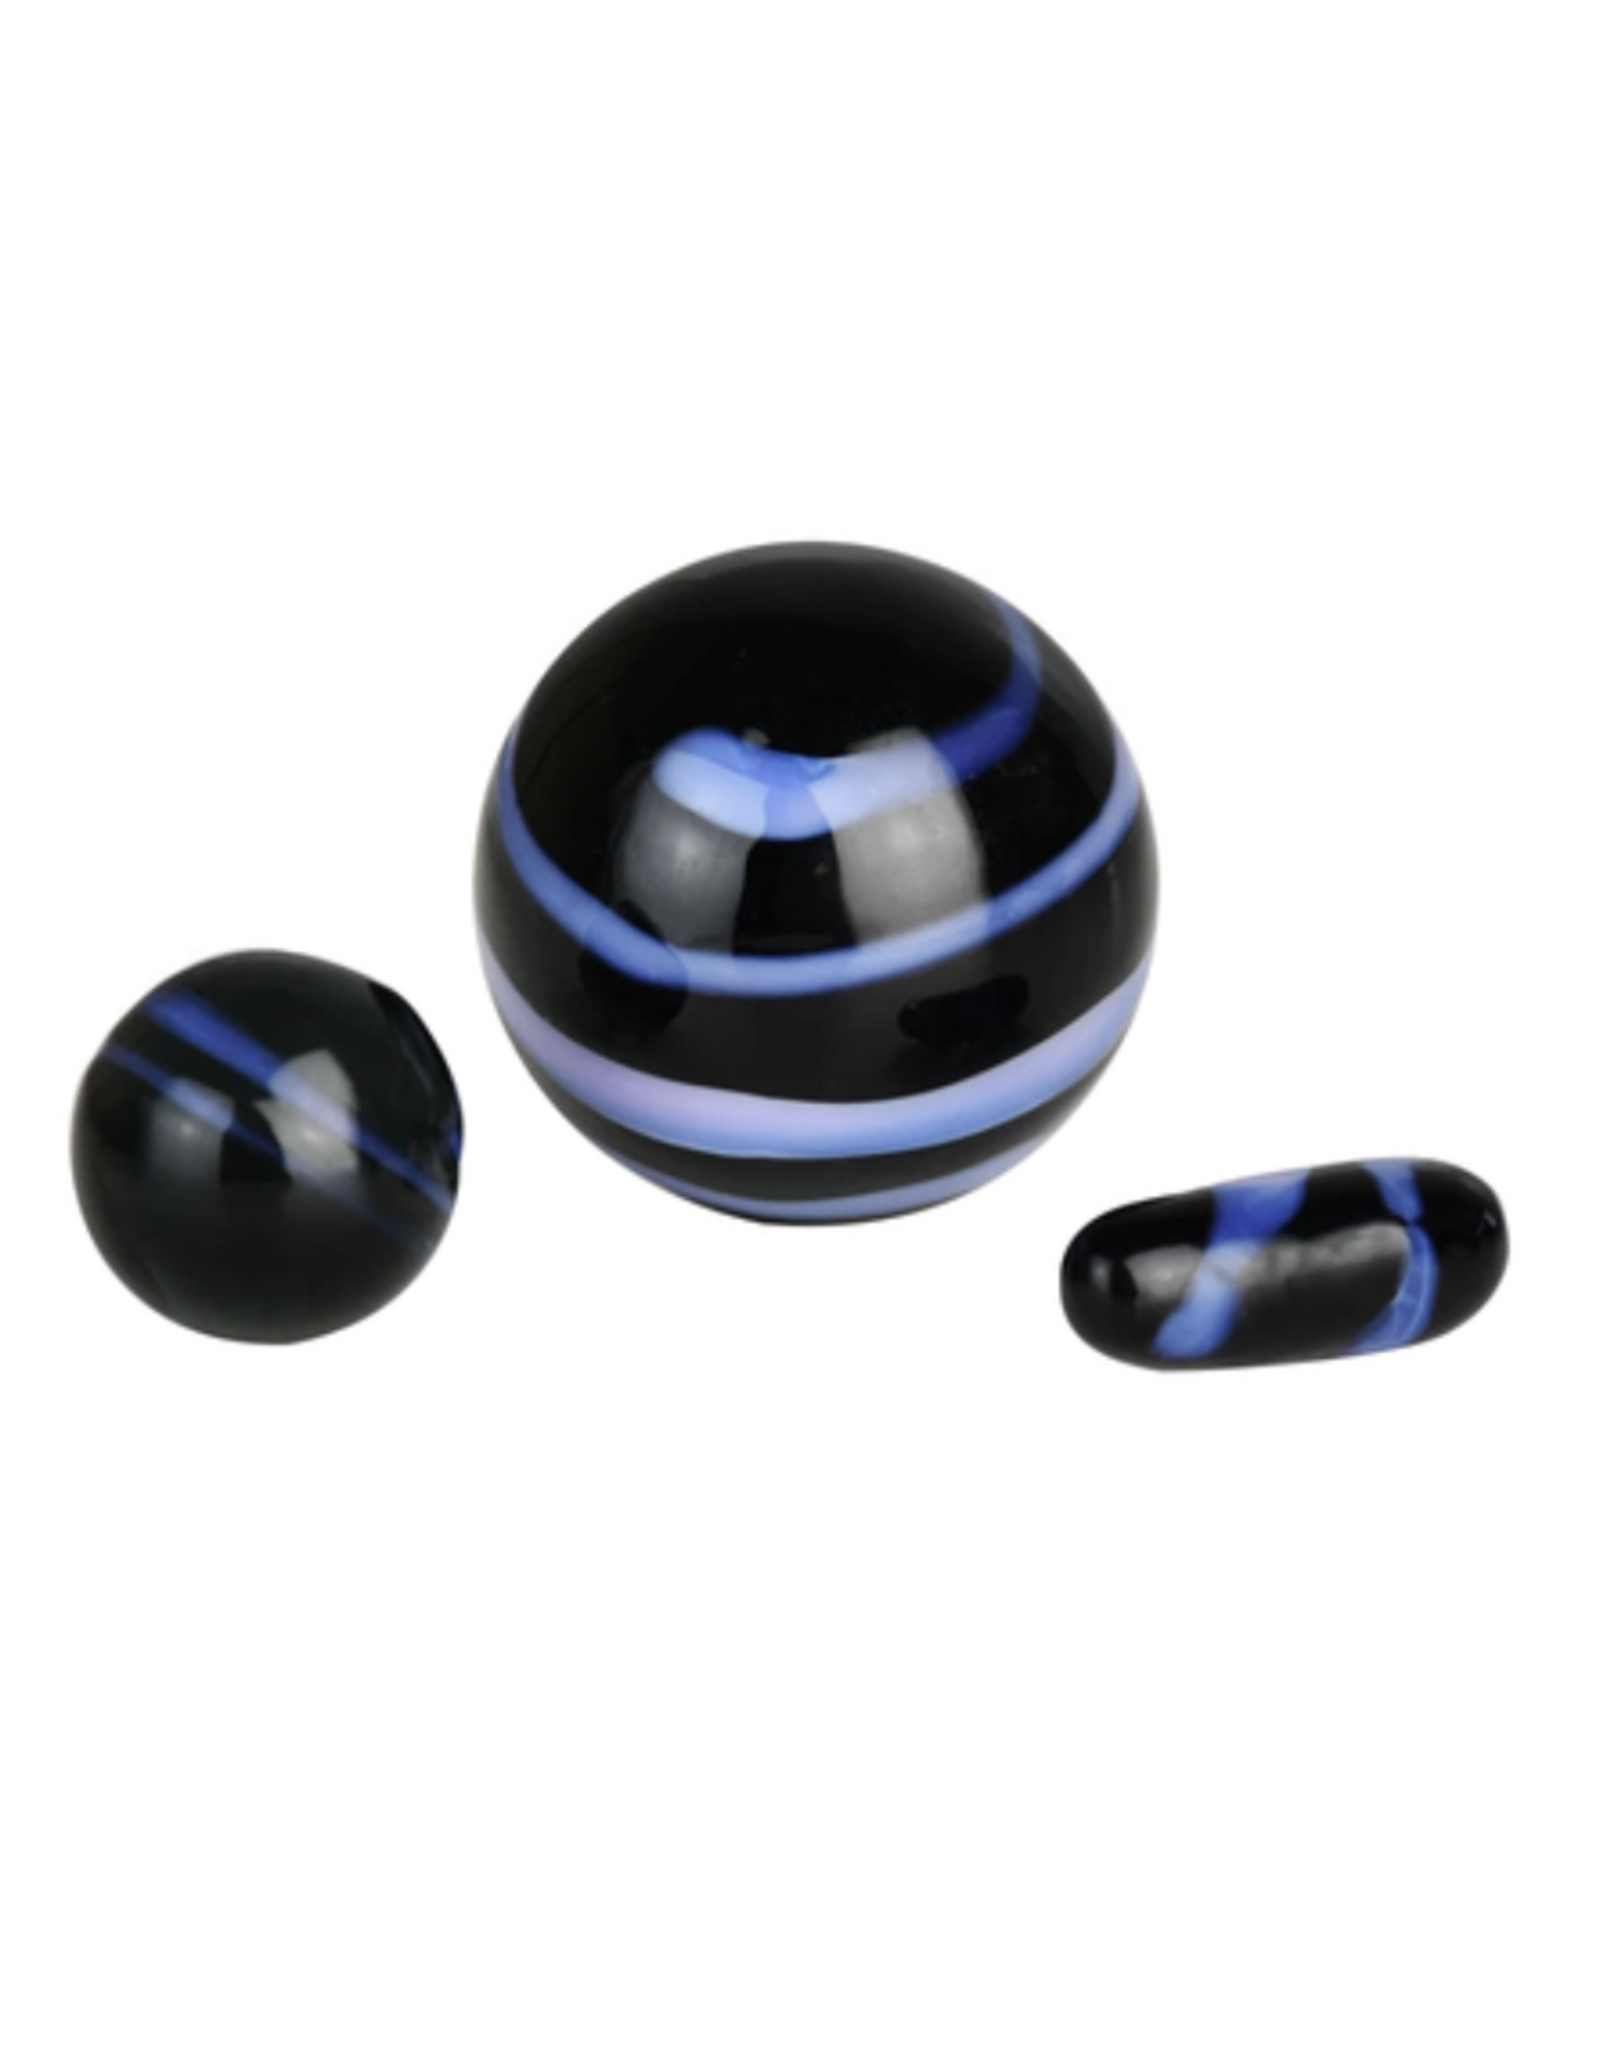 Pulsar Terp Slurper Pill and Marble 3 Piece Set by Pulsar